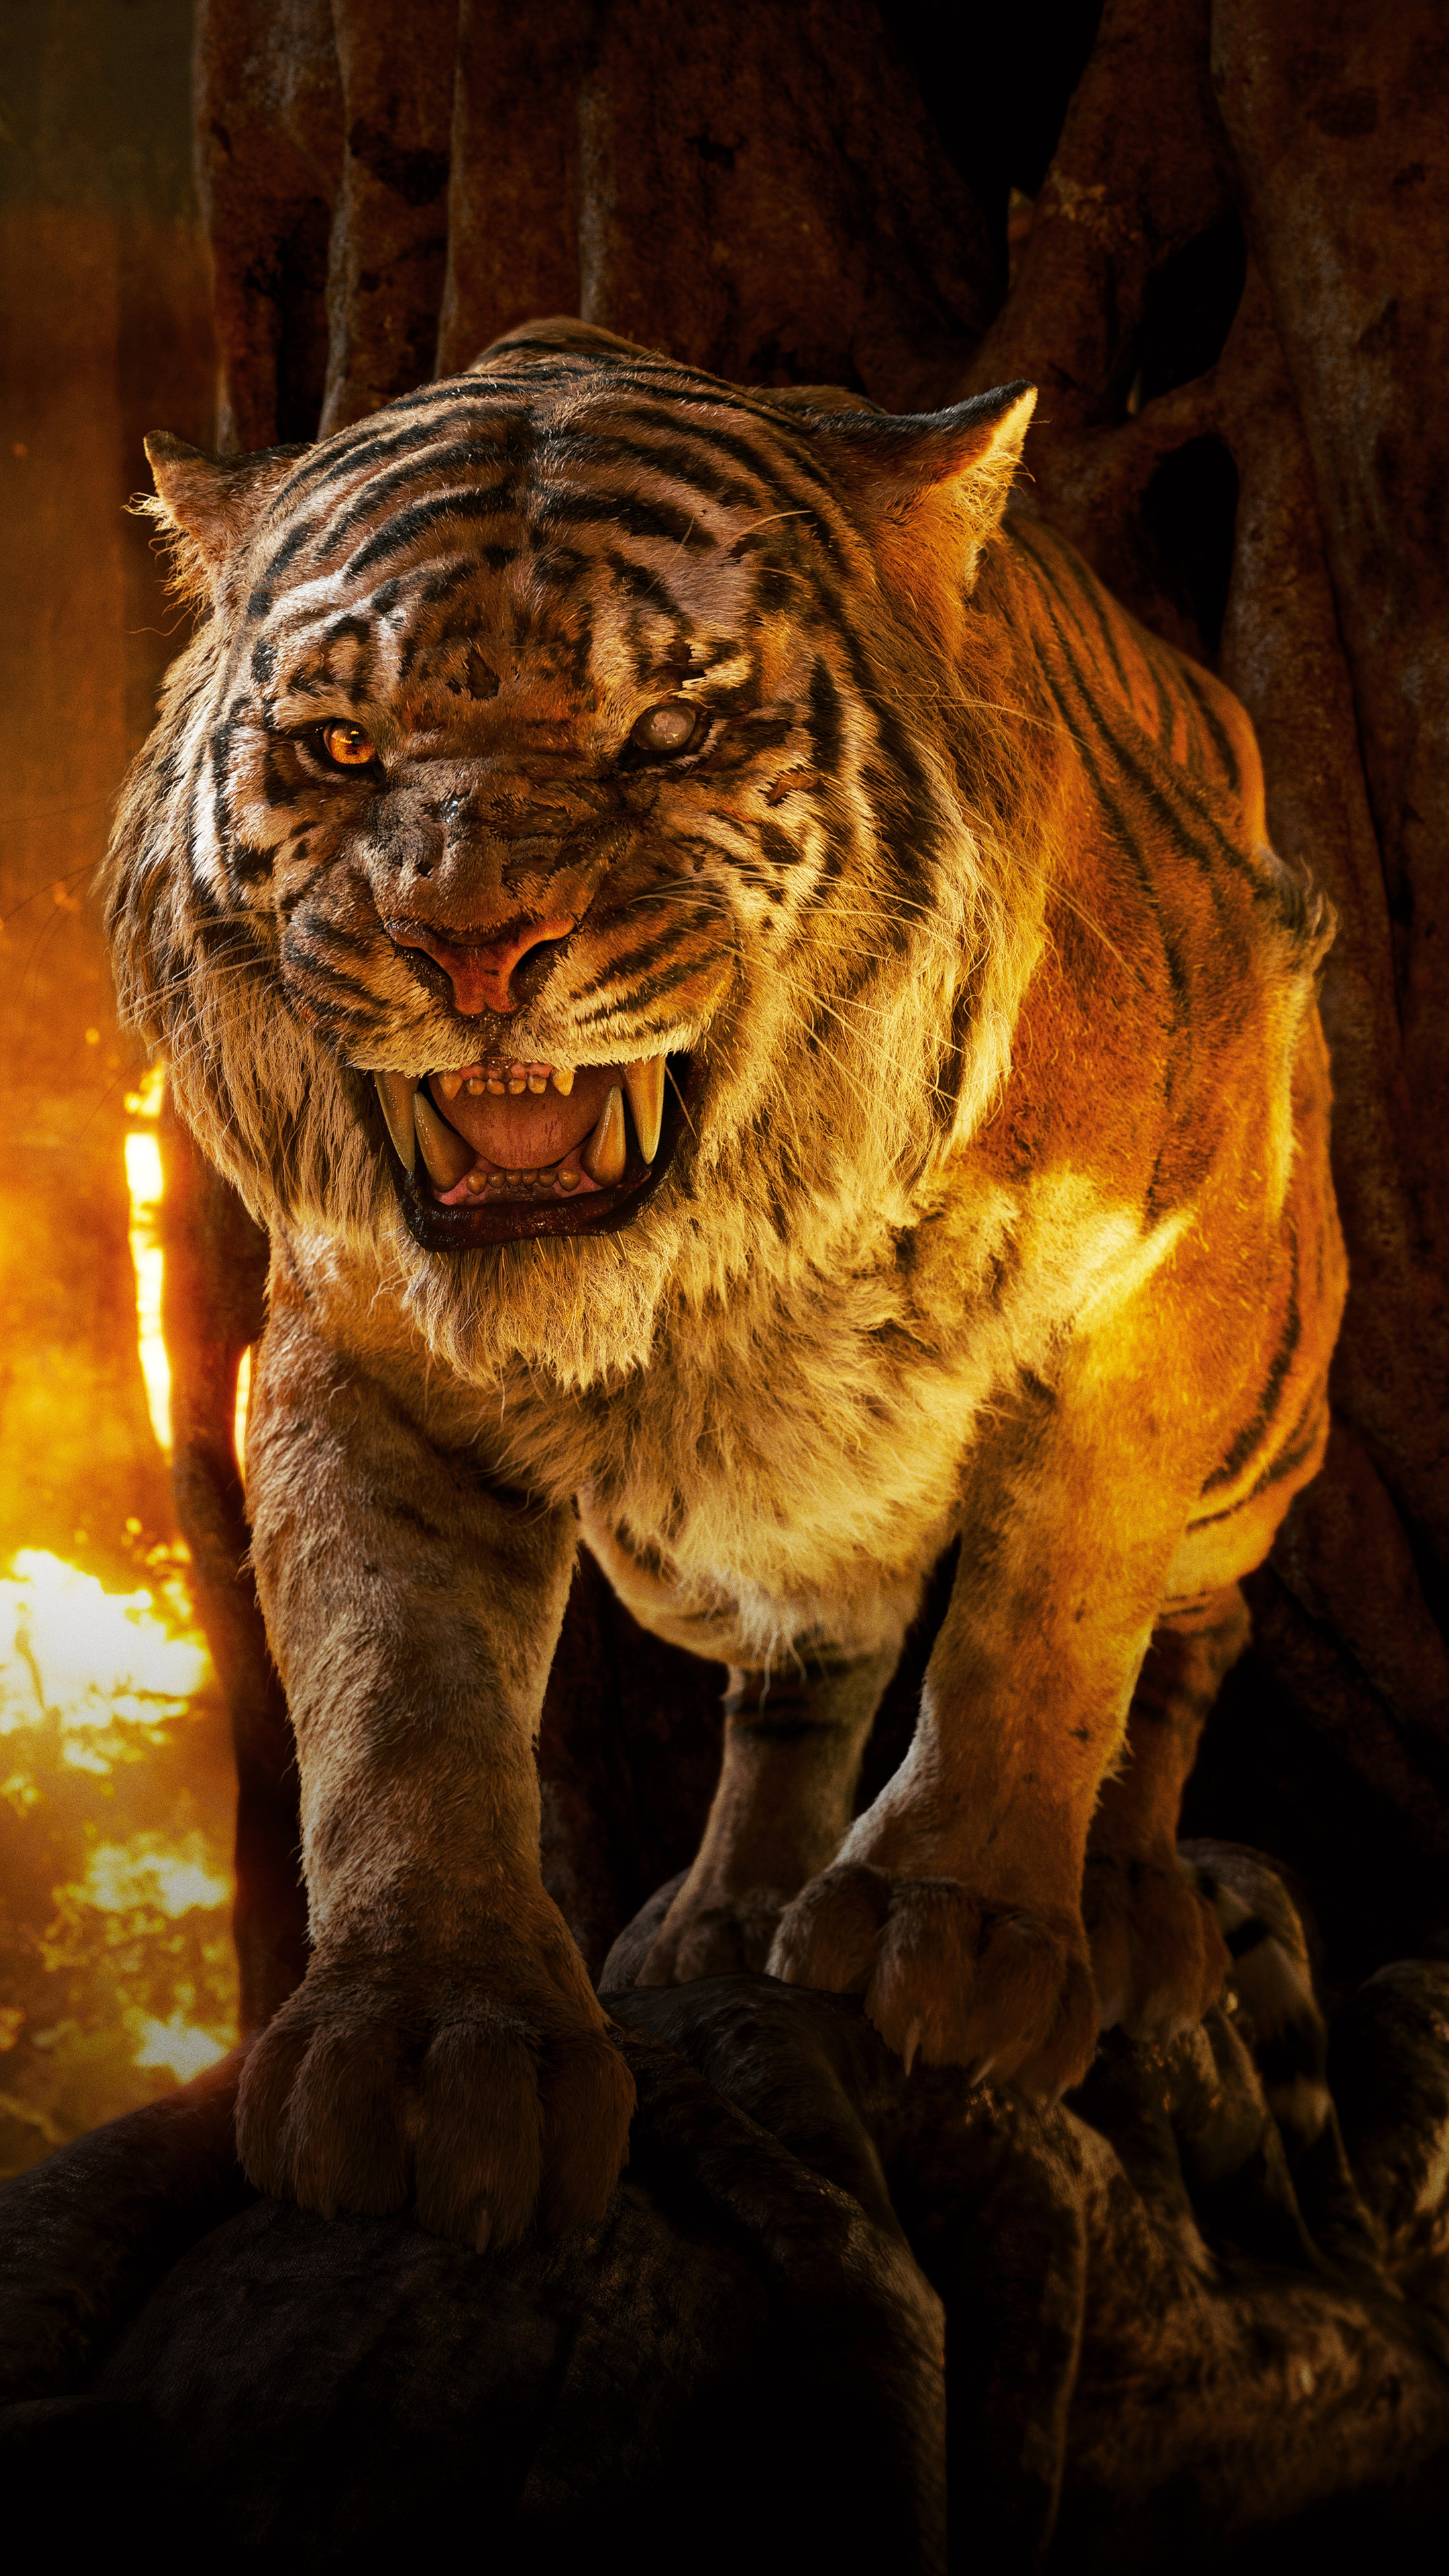 The Jungle Book (Movie), Tiger in action, Sony Xperia X XZ Z5 Premium HD 4K wallpapers, Striking visuals, 2160x3840 4K Phone